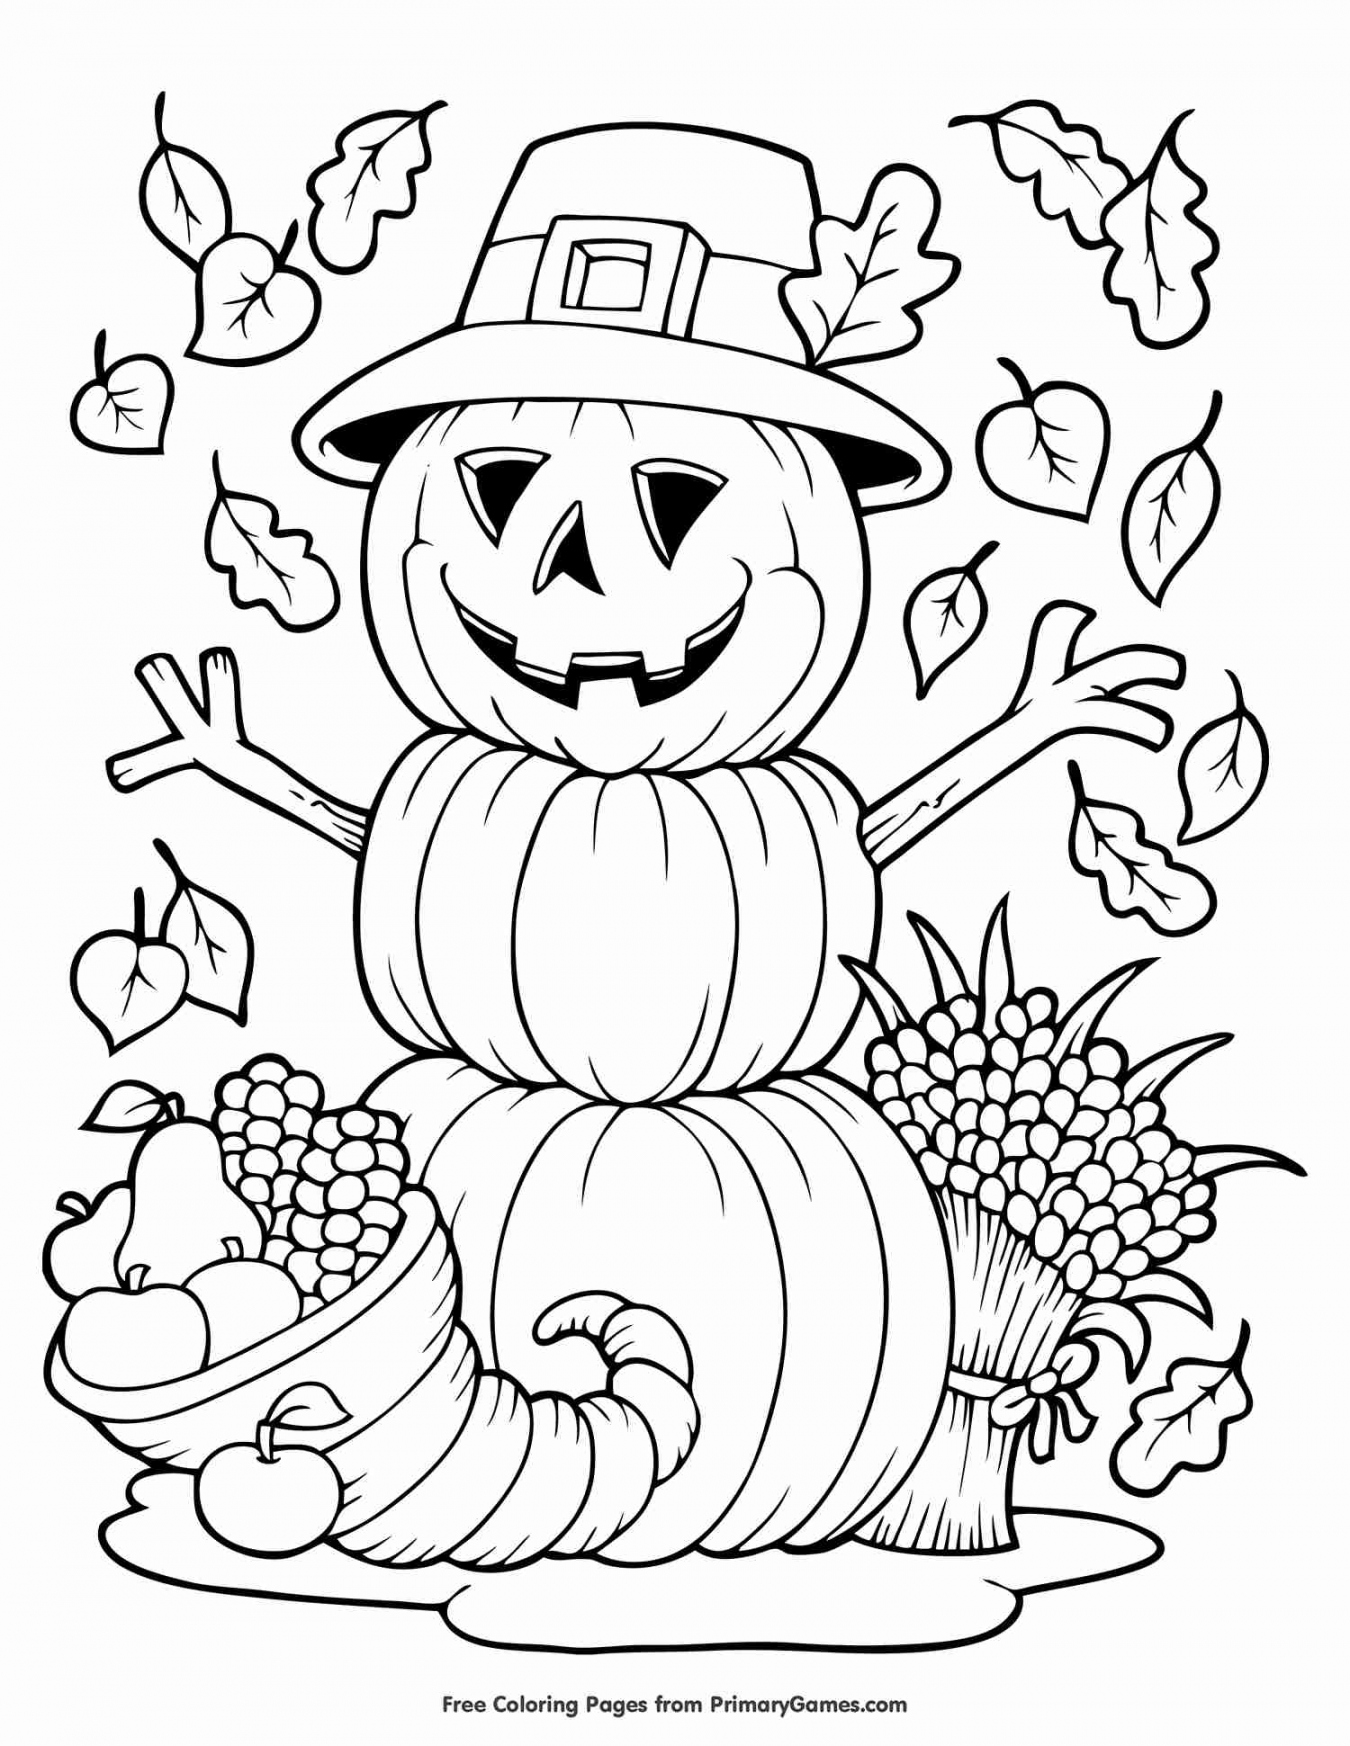 Fall Coloring Pages Printable Free - Printable -  Places to Find Free Autumn and Fall Coloring Pages